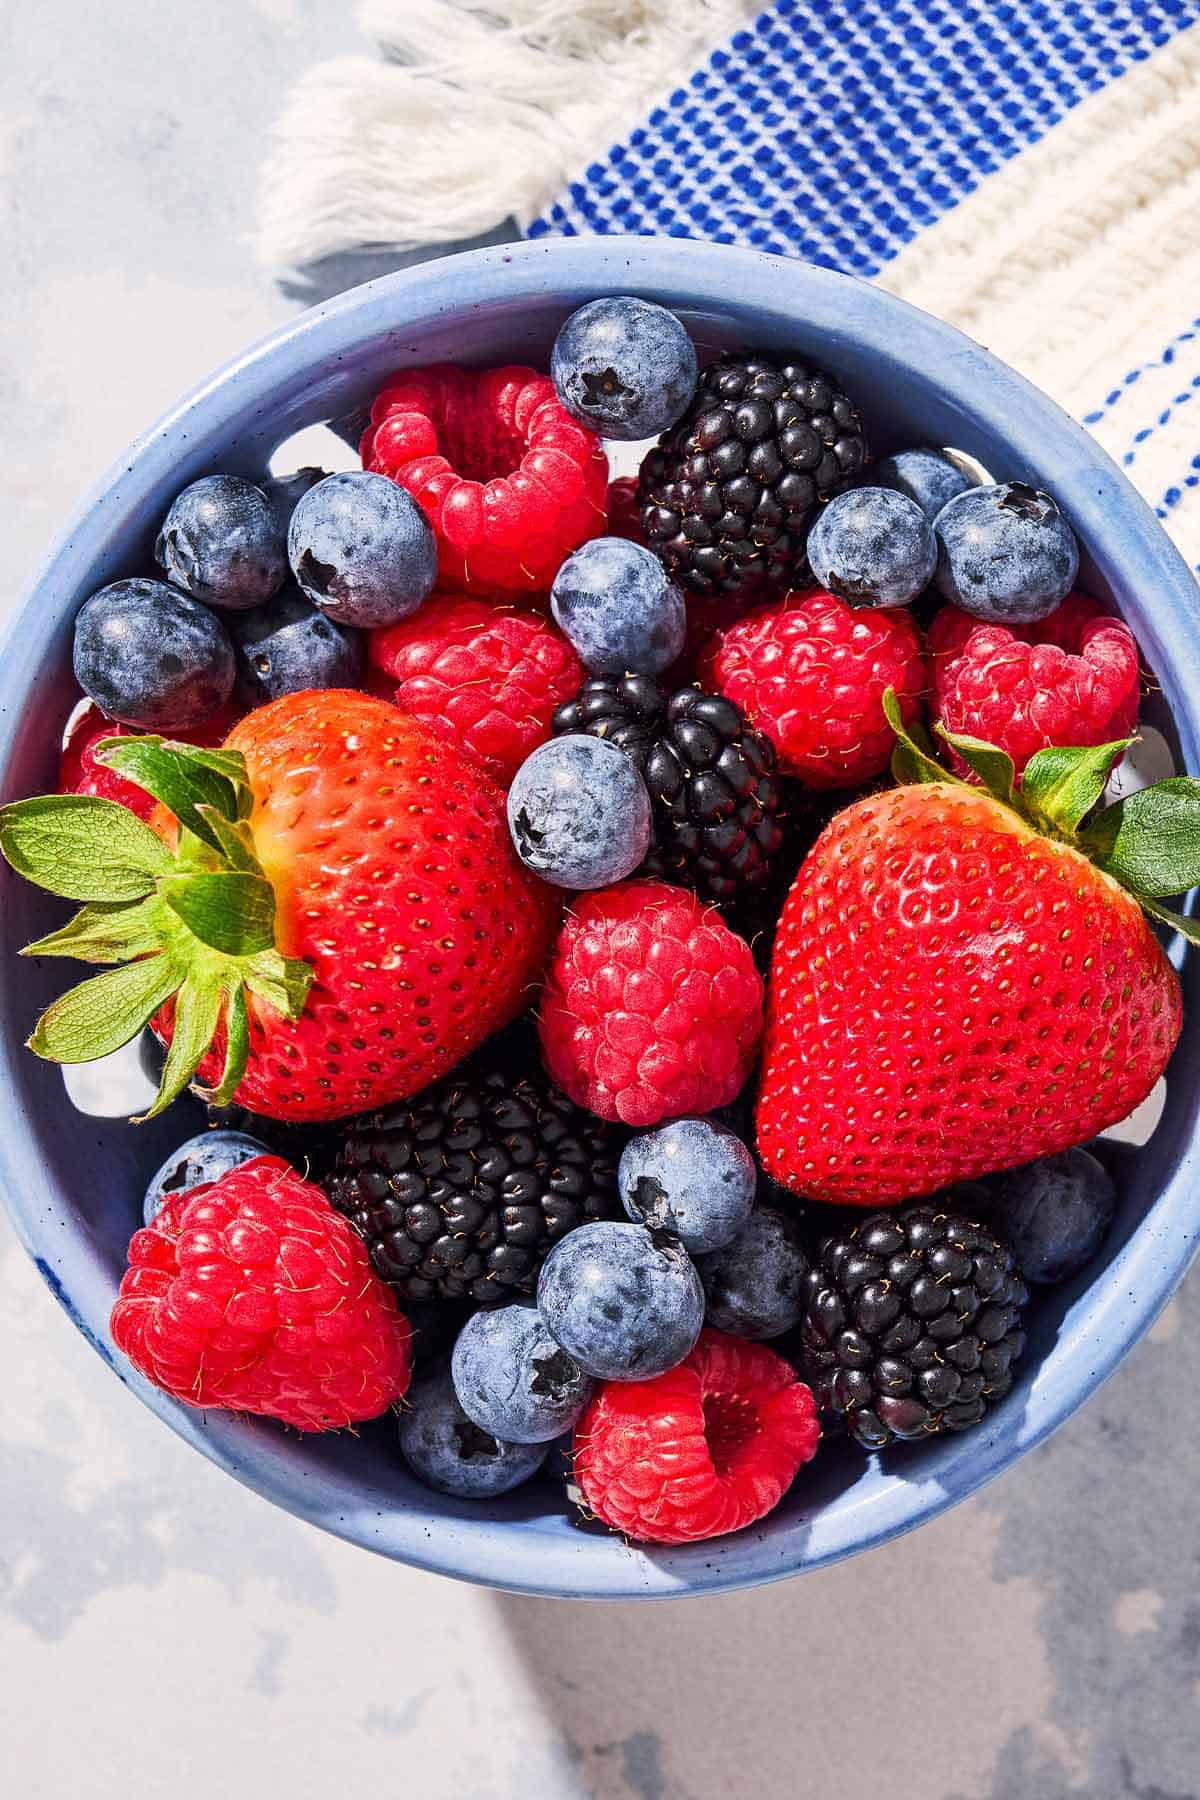 A close up of a blueberries, blackberries and strawberries in a bowl next to a kitchen towel